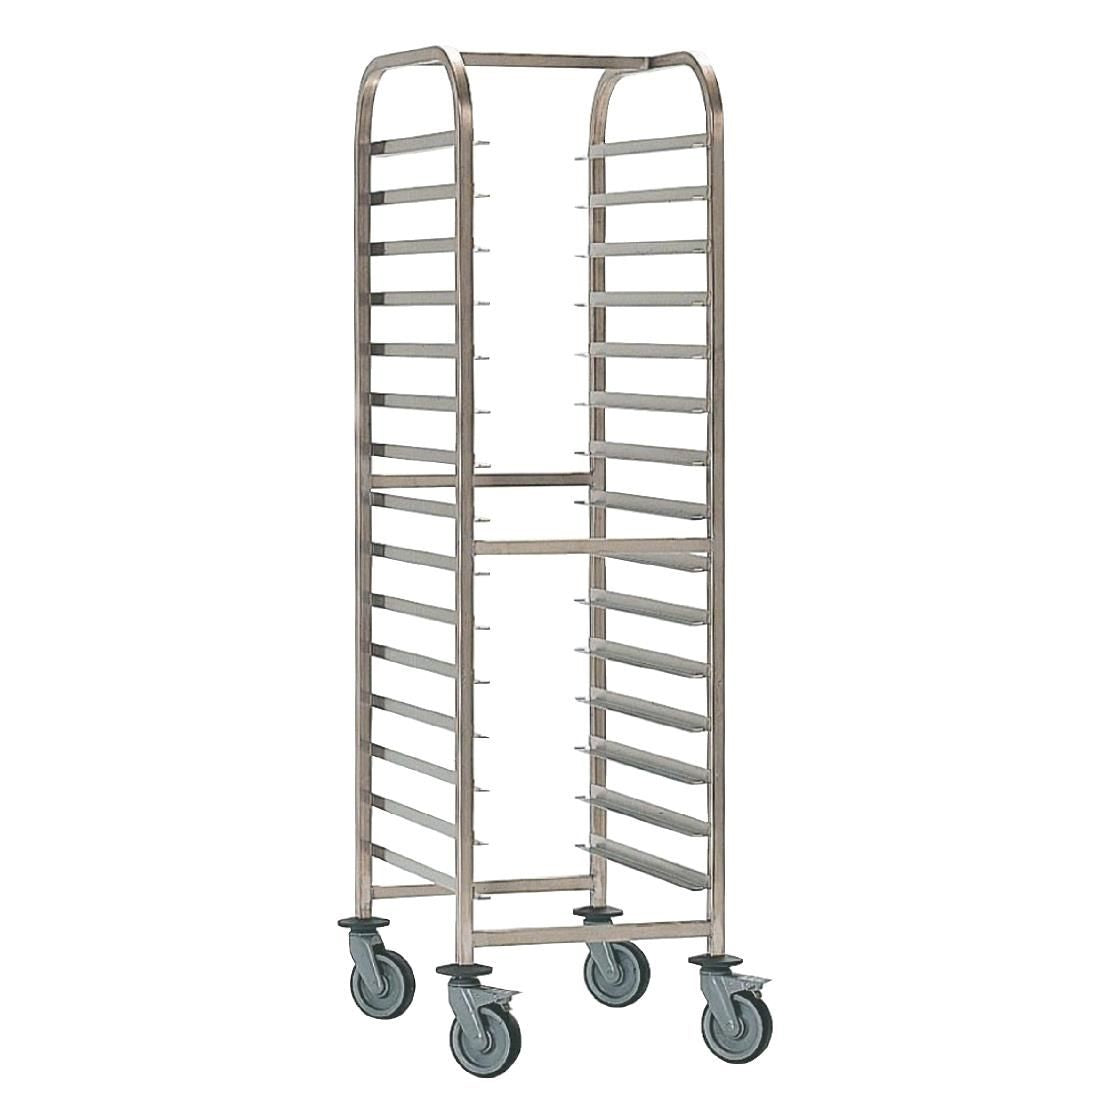 Bourgeat Patisserie Racking Trolley 15 Shelves JD Catering Equipment Solutions Ltd